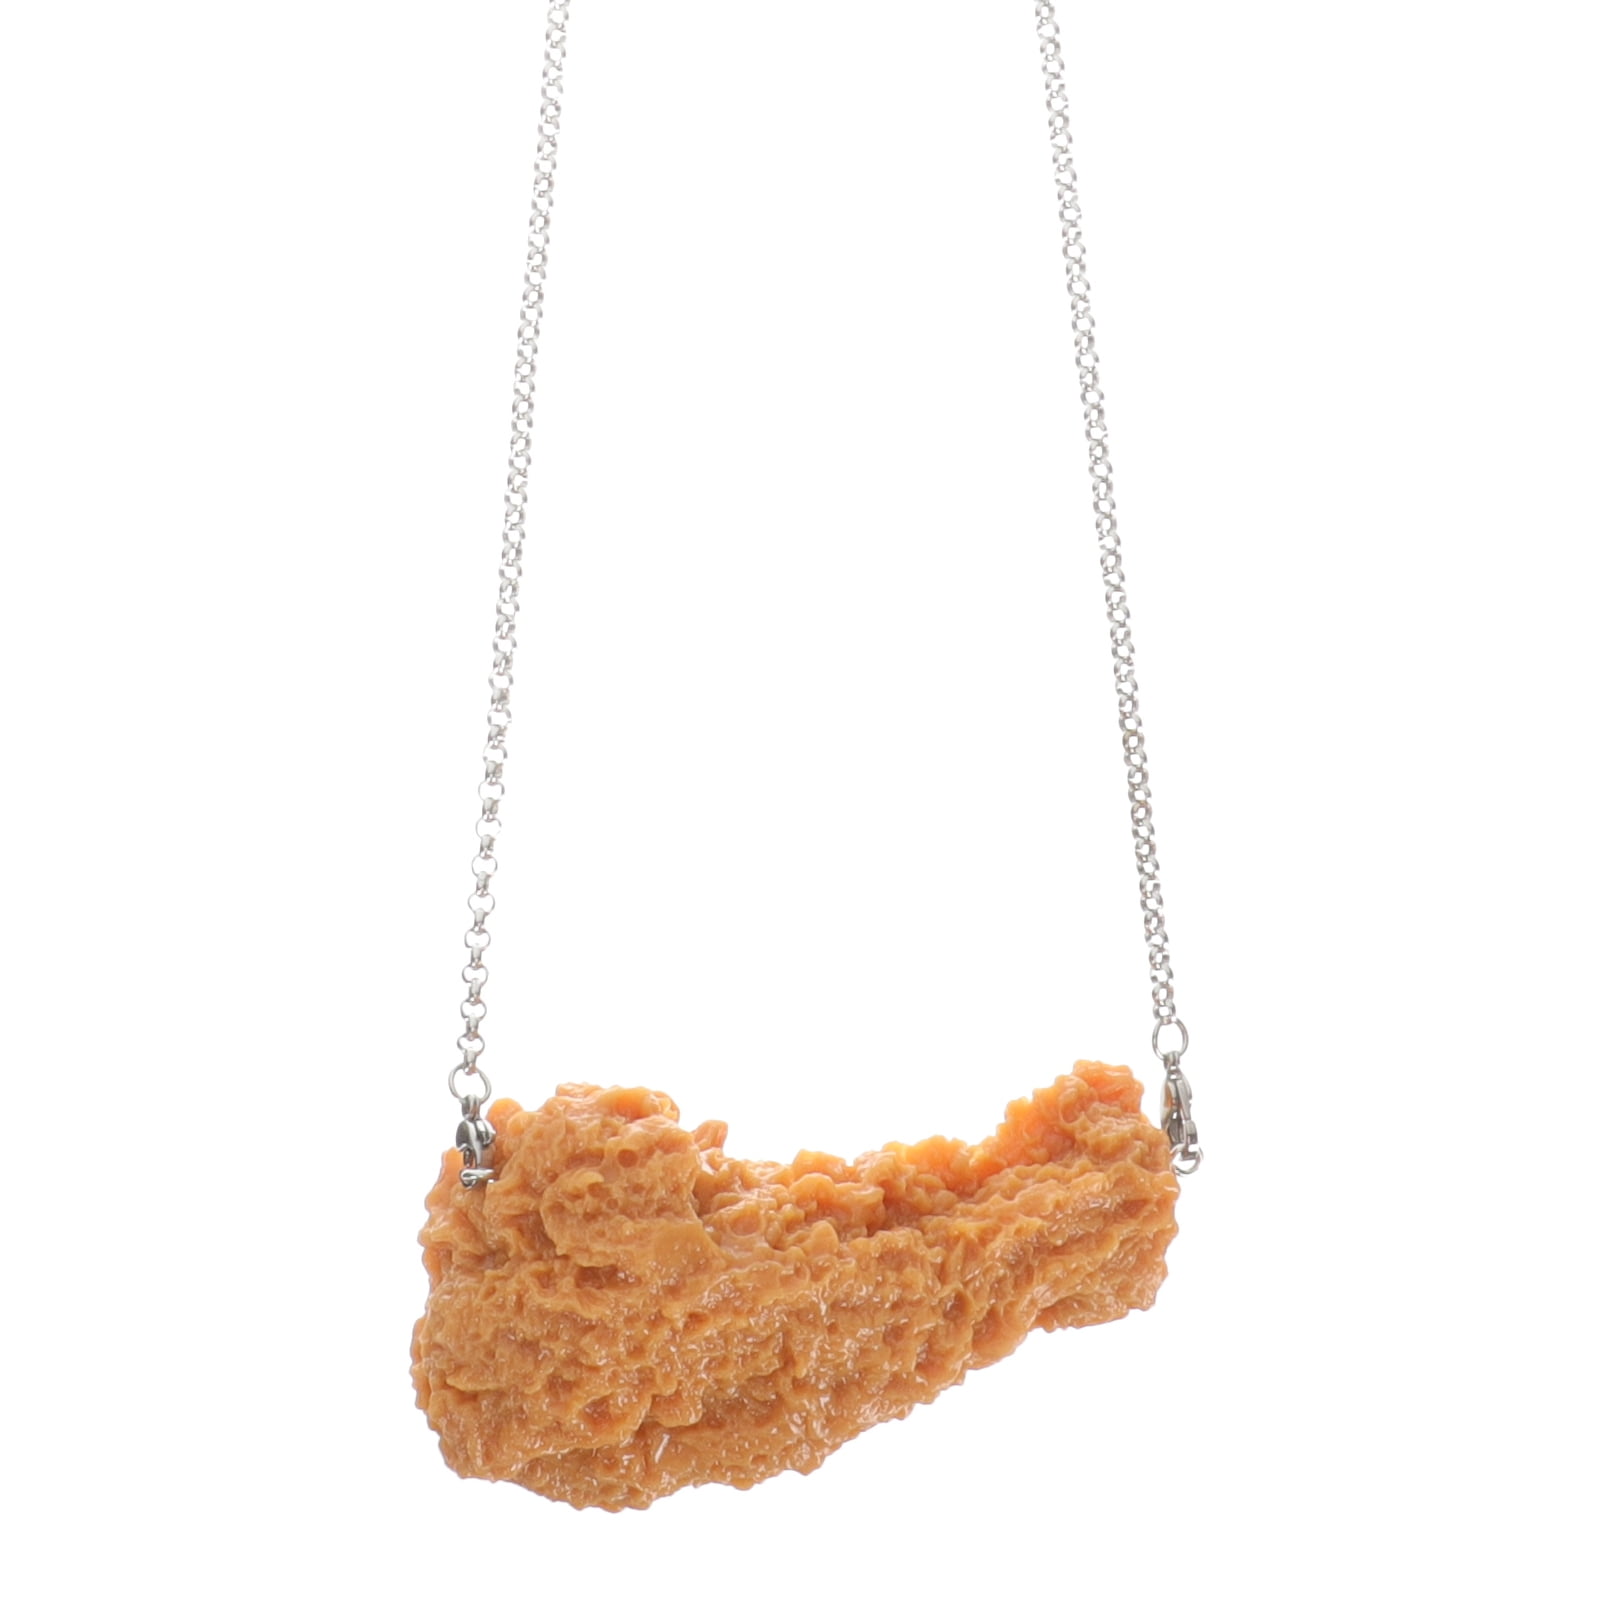 Fried Chicken Necklace Funny Necklace Novelty Necklace Jewelry for Women Men b33efa2e ce59 4137 9fb6 ec73eb5892f1.d5c1c501f6dfd2c87dff172190b36238